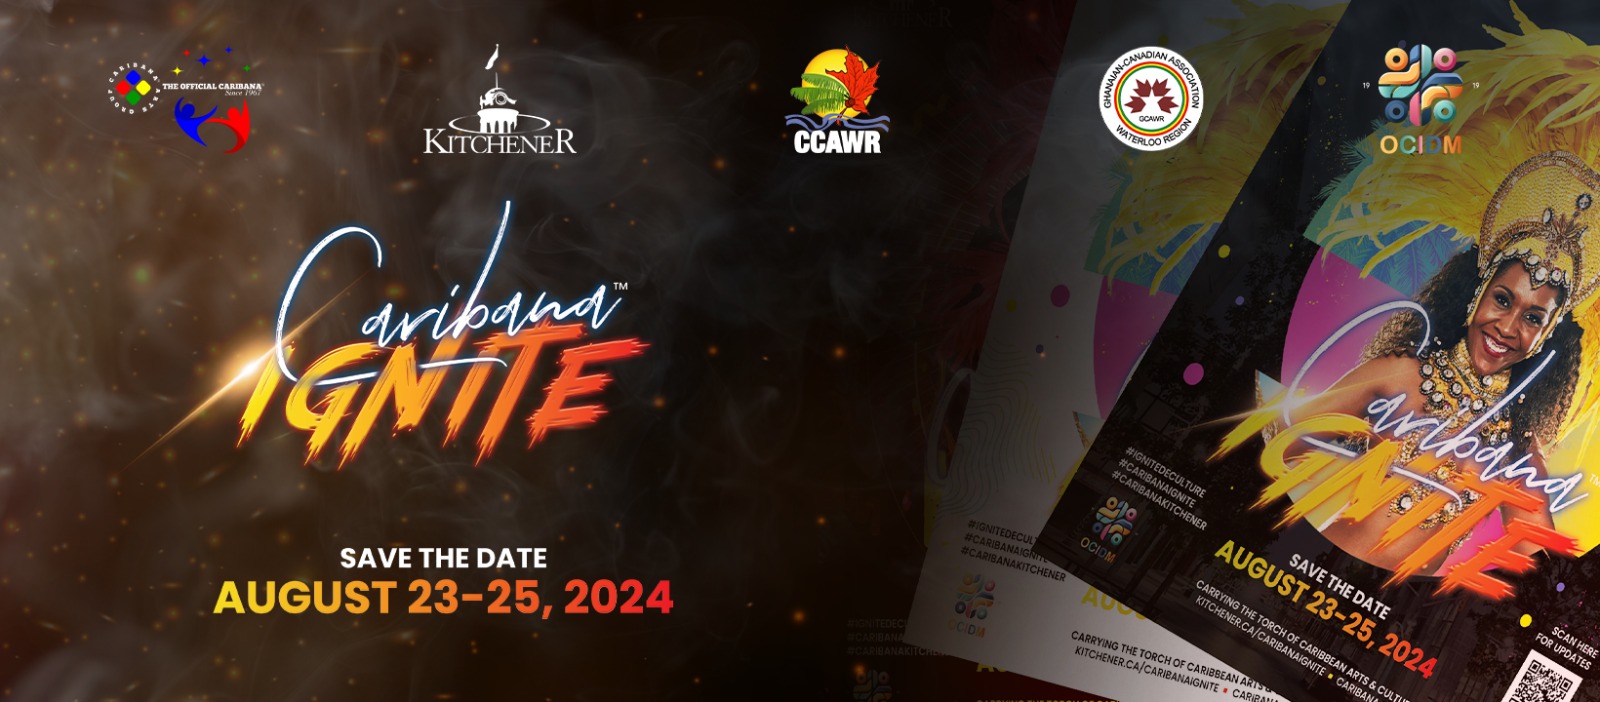 Caribana Ignite event scheduled for August 21-25, 2024.